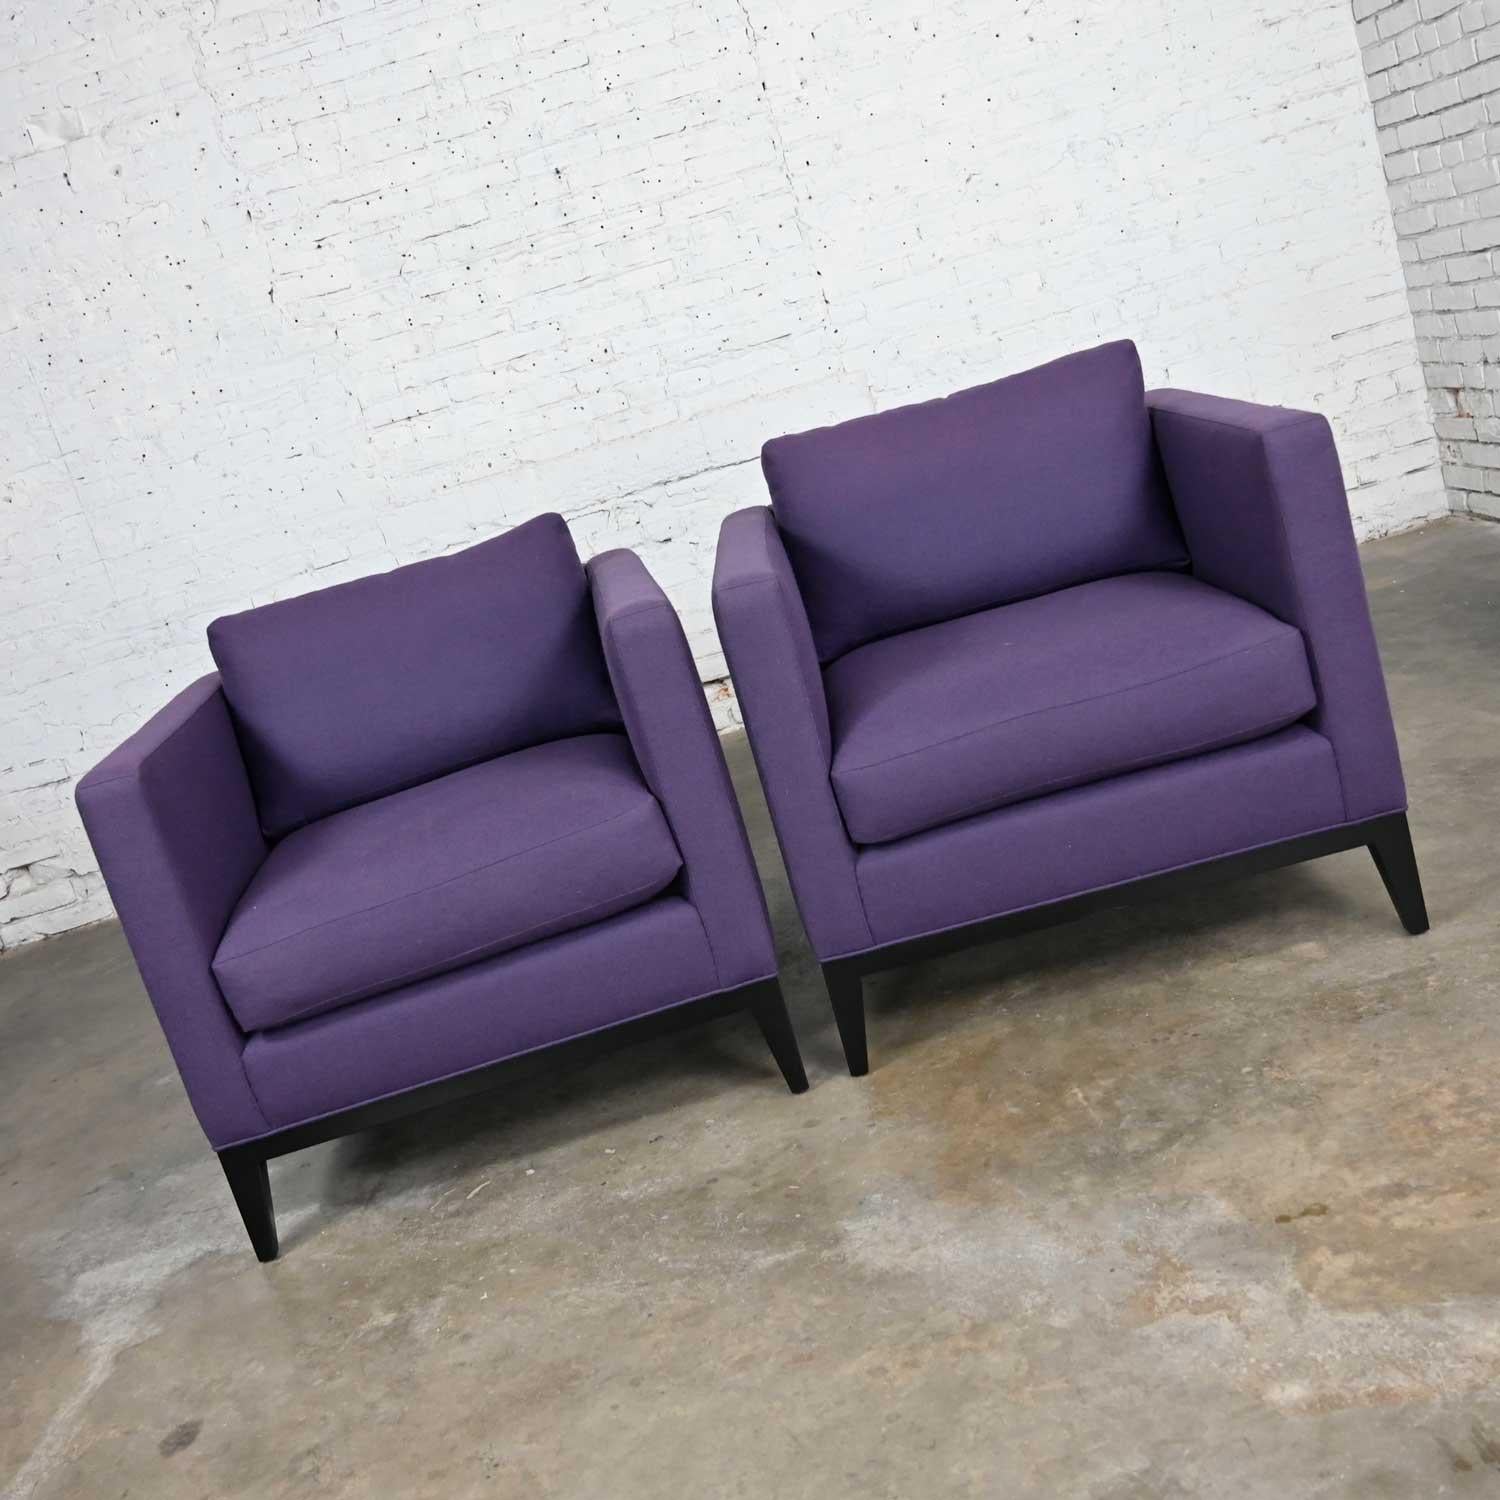 Modern Purple Plum Tone Tuxedo Style Club Chairs by Baker a Pair For Sale 1